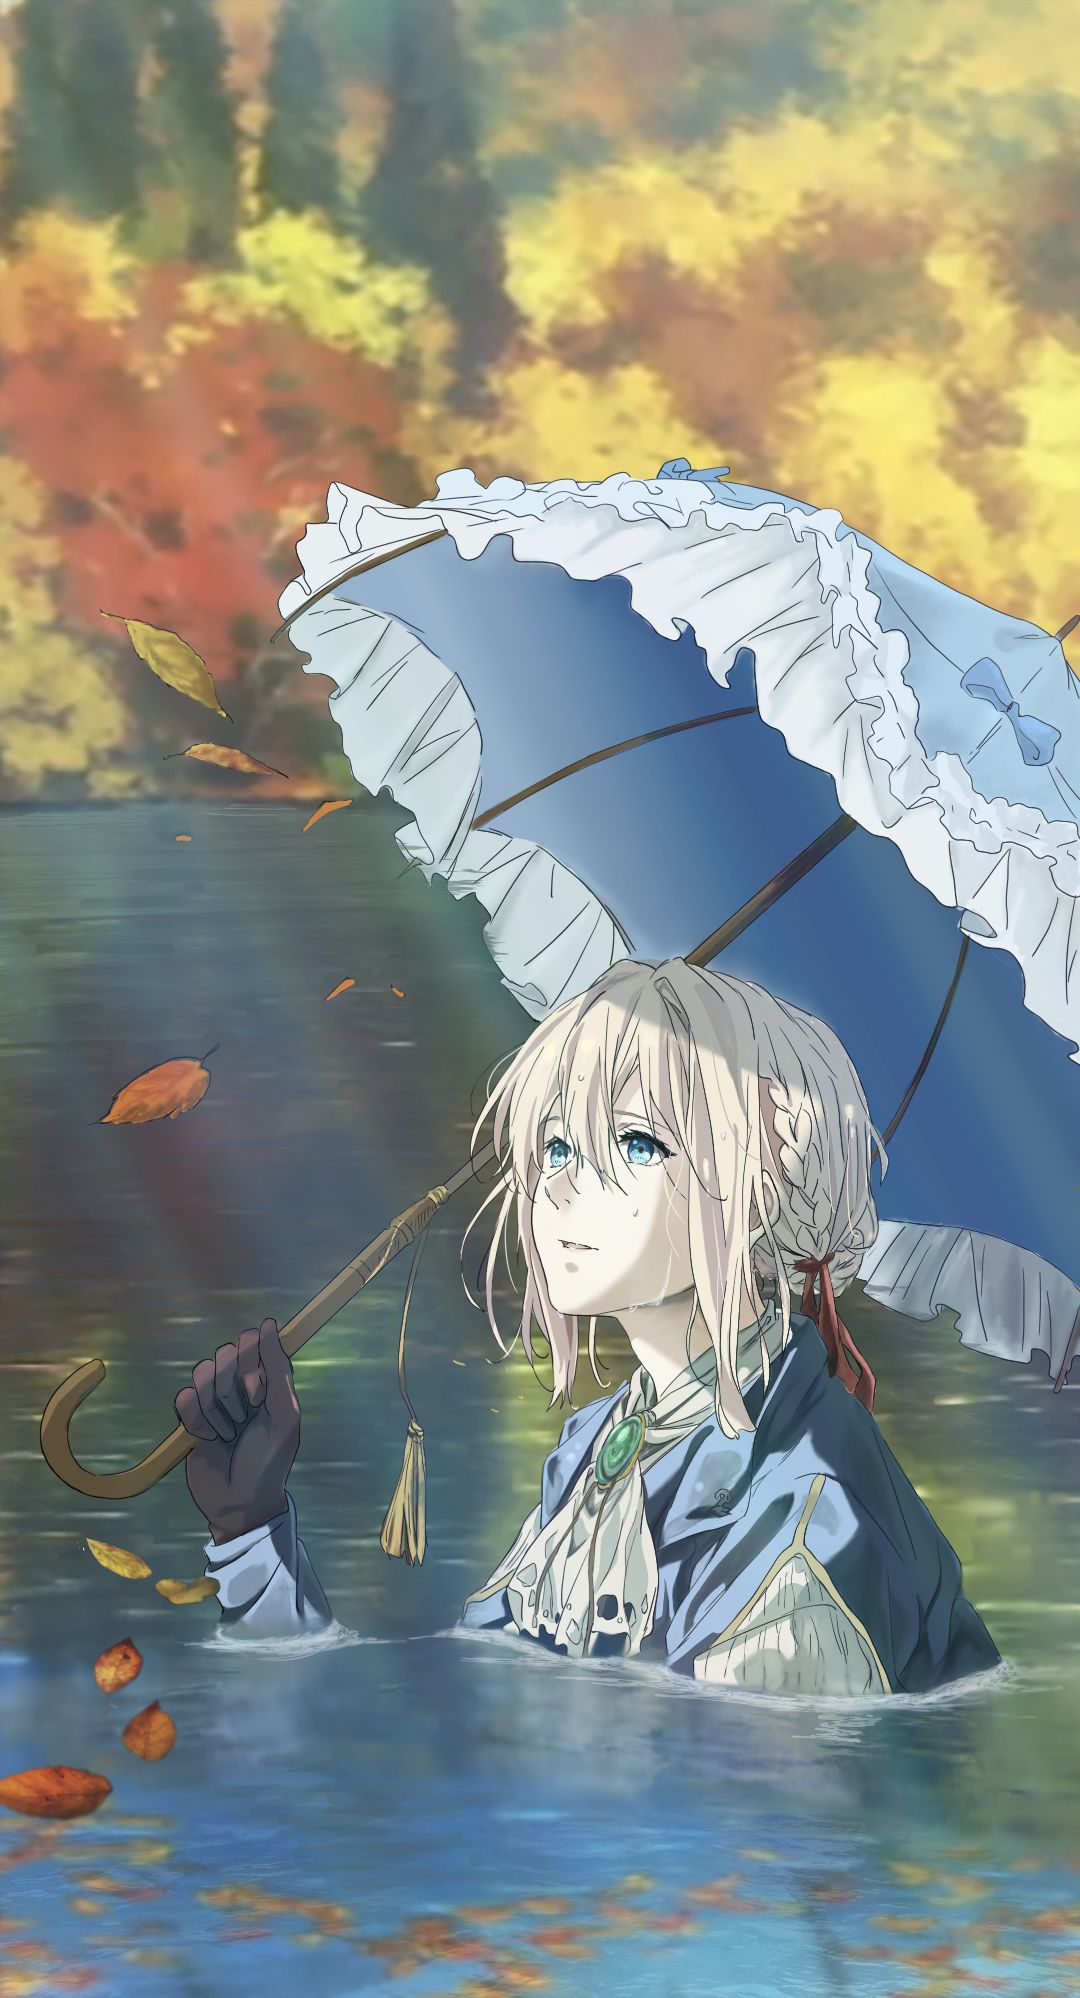 Animated gif about love in Violet Evergarden by α૨iαท૯ ทαઽ૮iʍ૯ทƬѳ○•ツ | Violet  evergreen, Violet evergarden anime, Anime